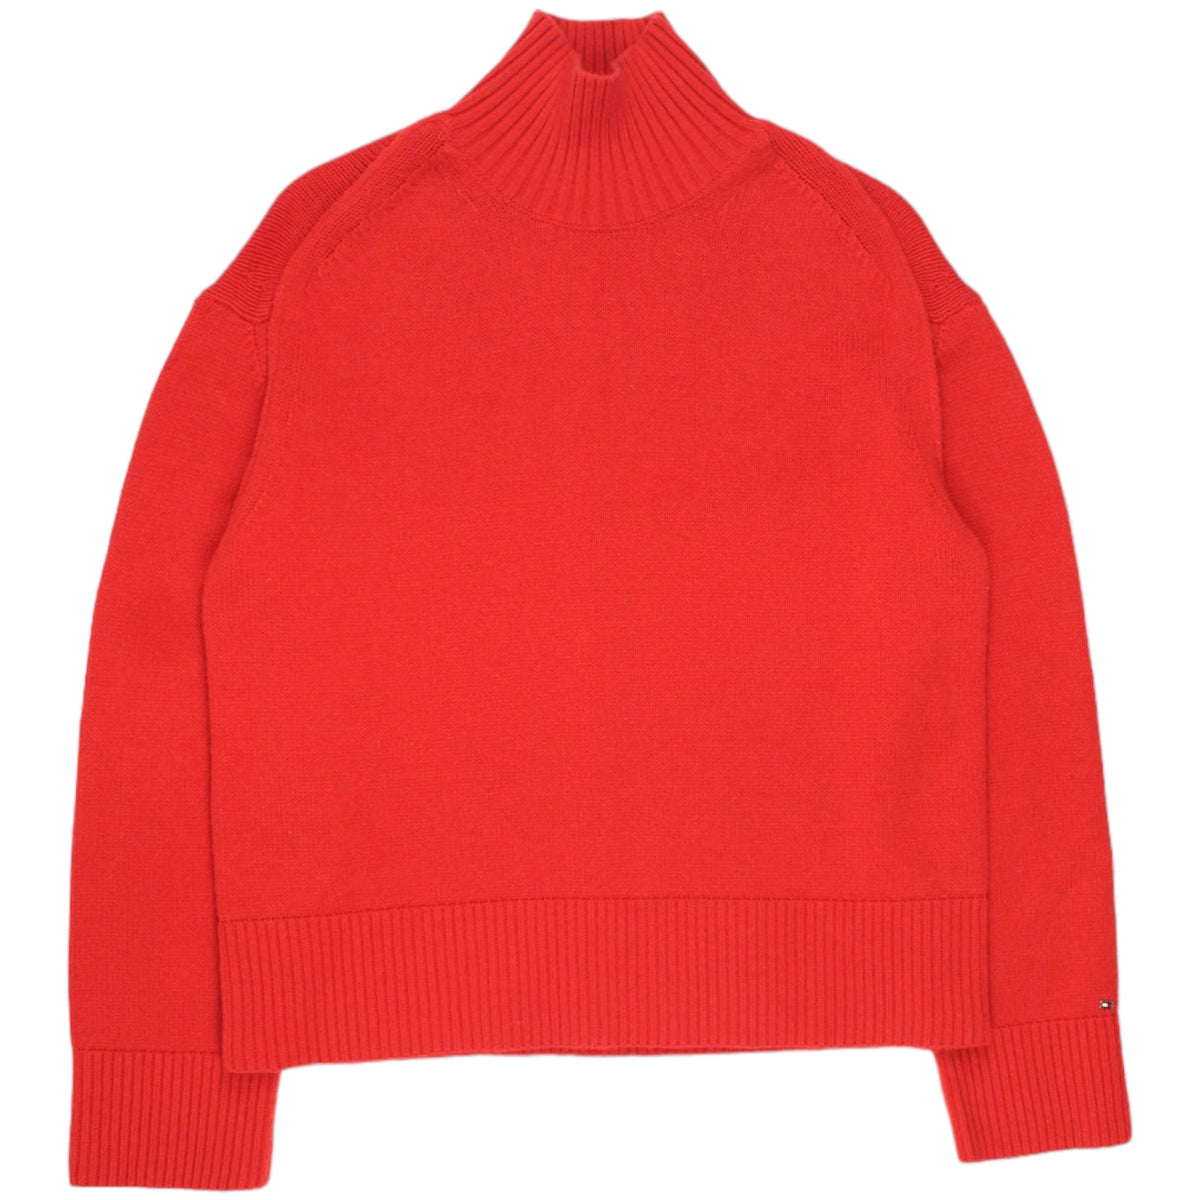 Tommy Hilfiger Red Wool Blend Sweater